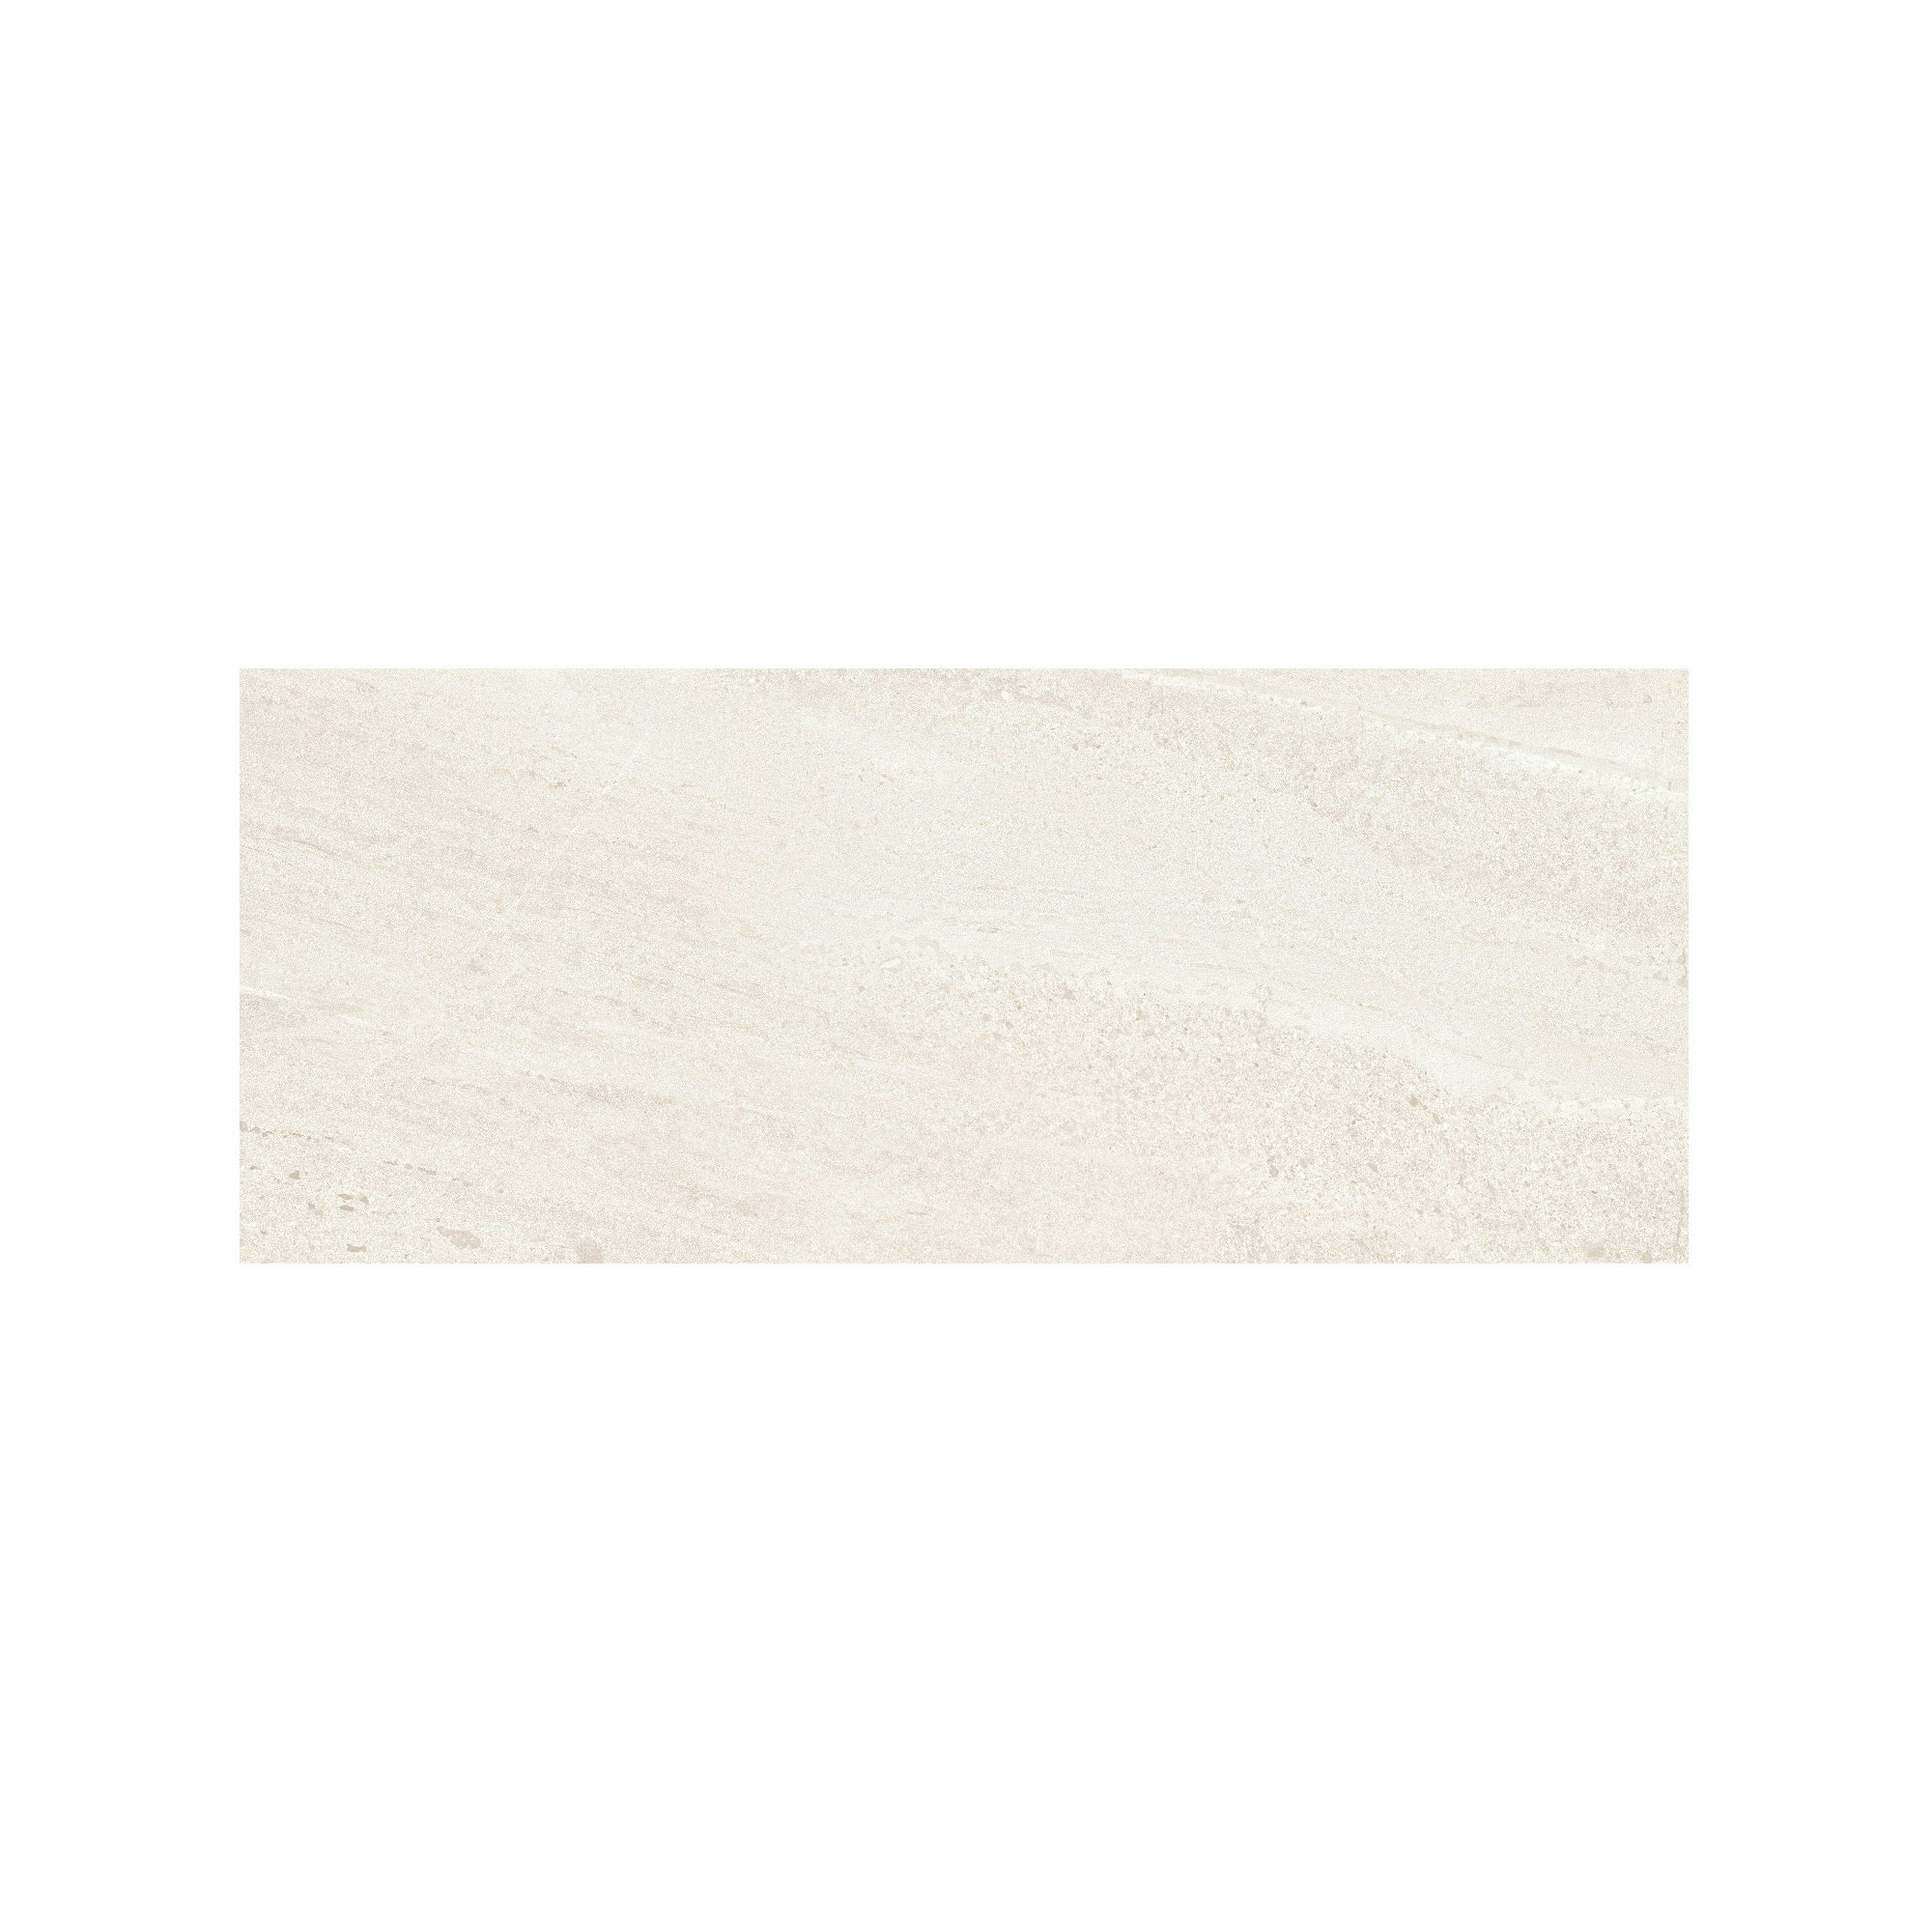 Imperia Sand Wall Tile